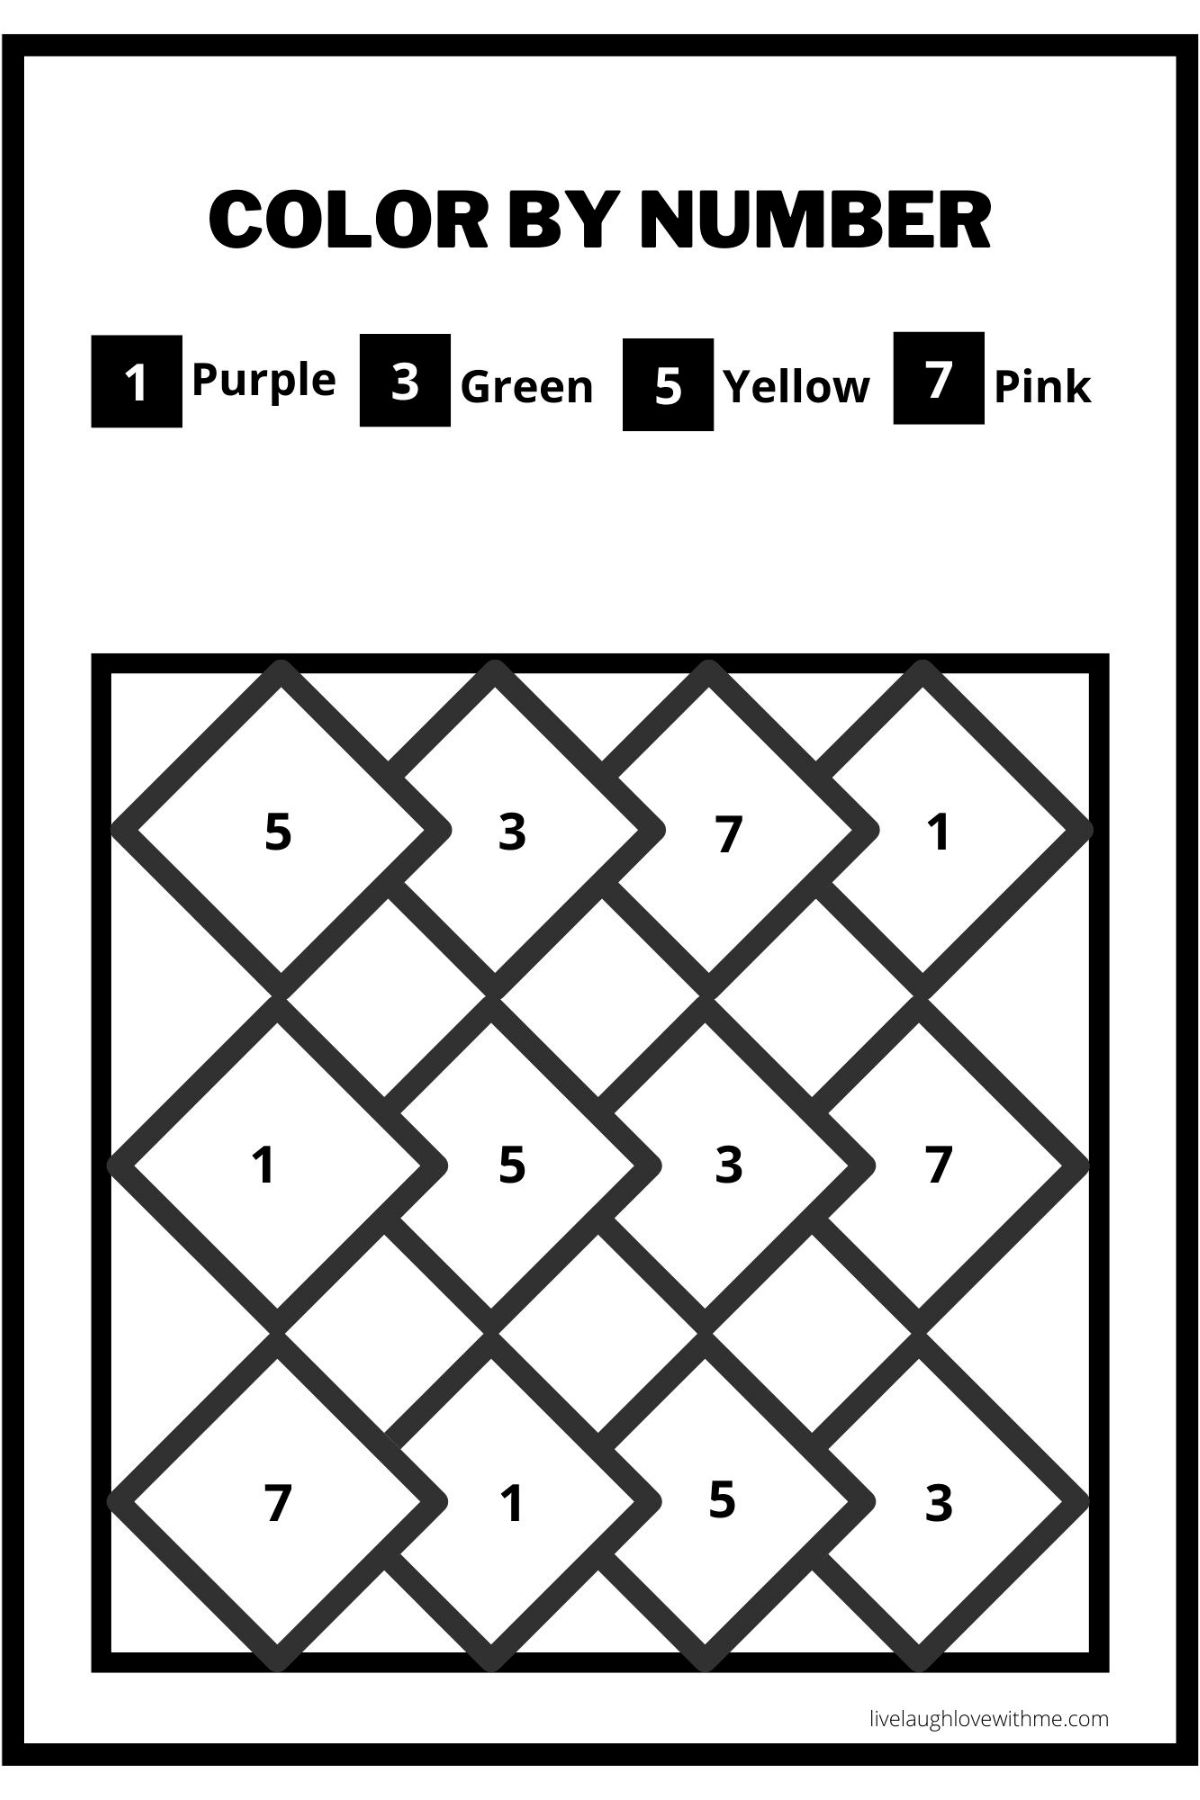 Color by number kids coloring pages free printable